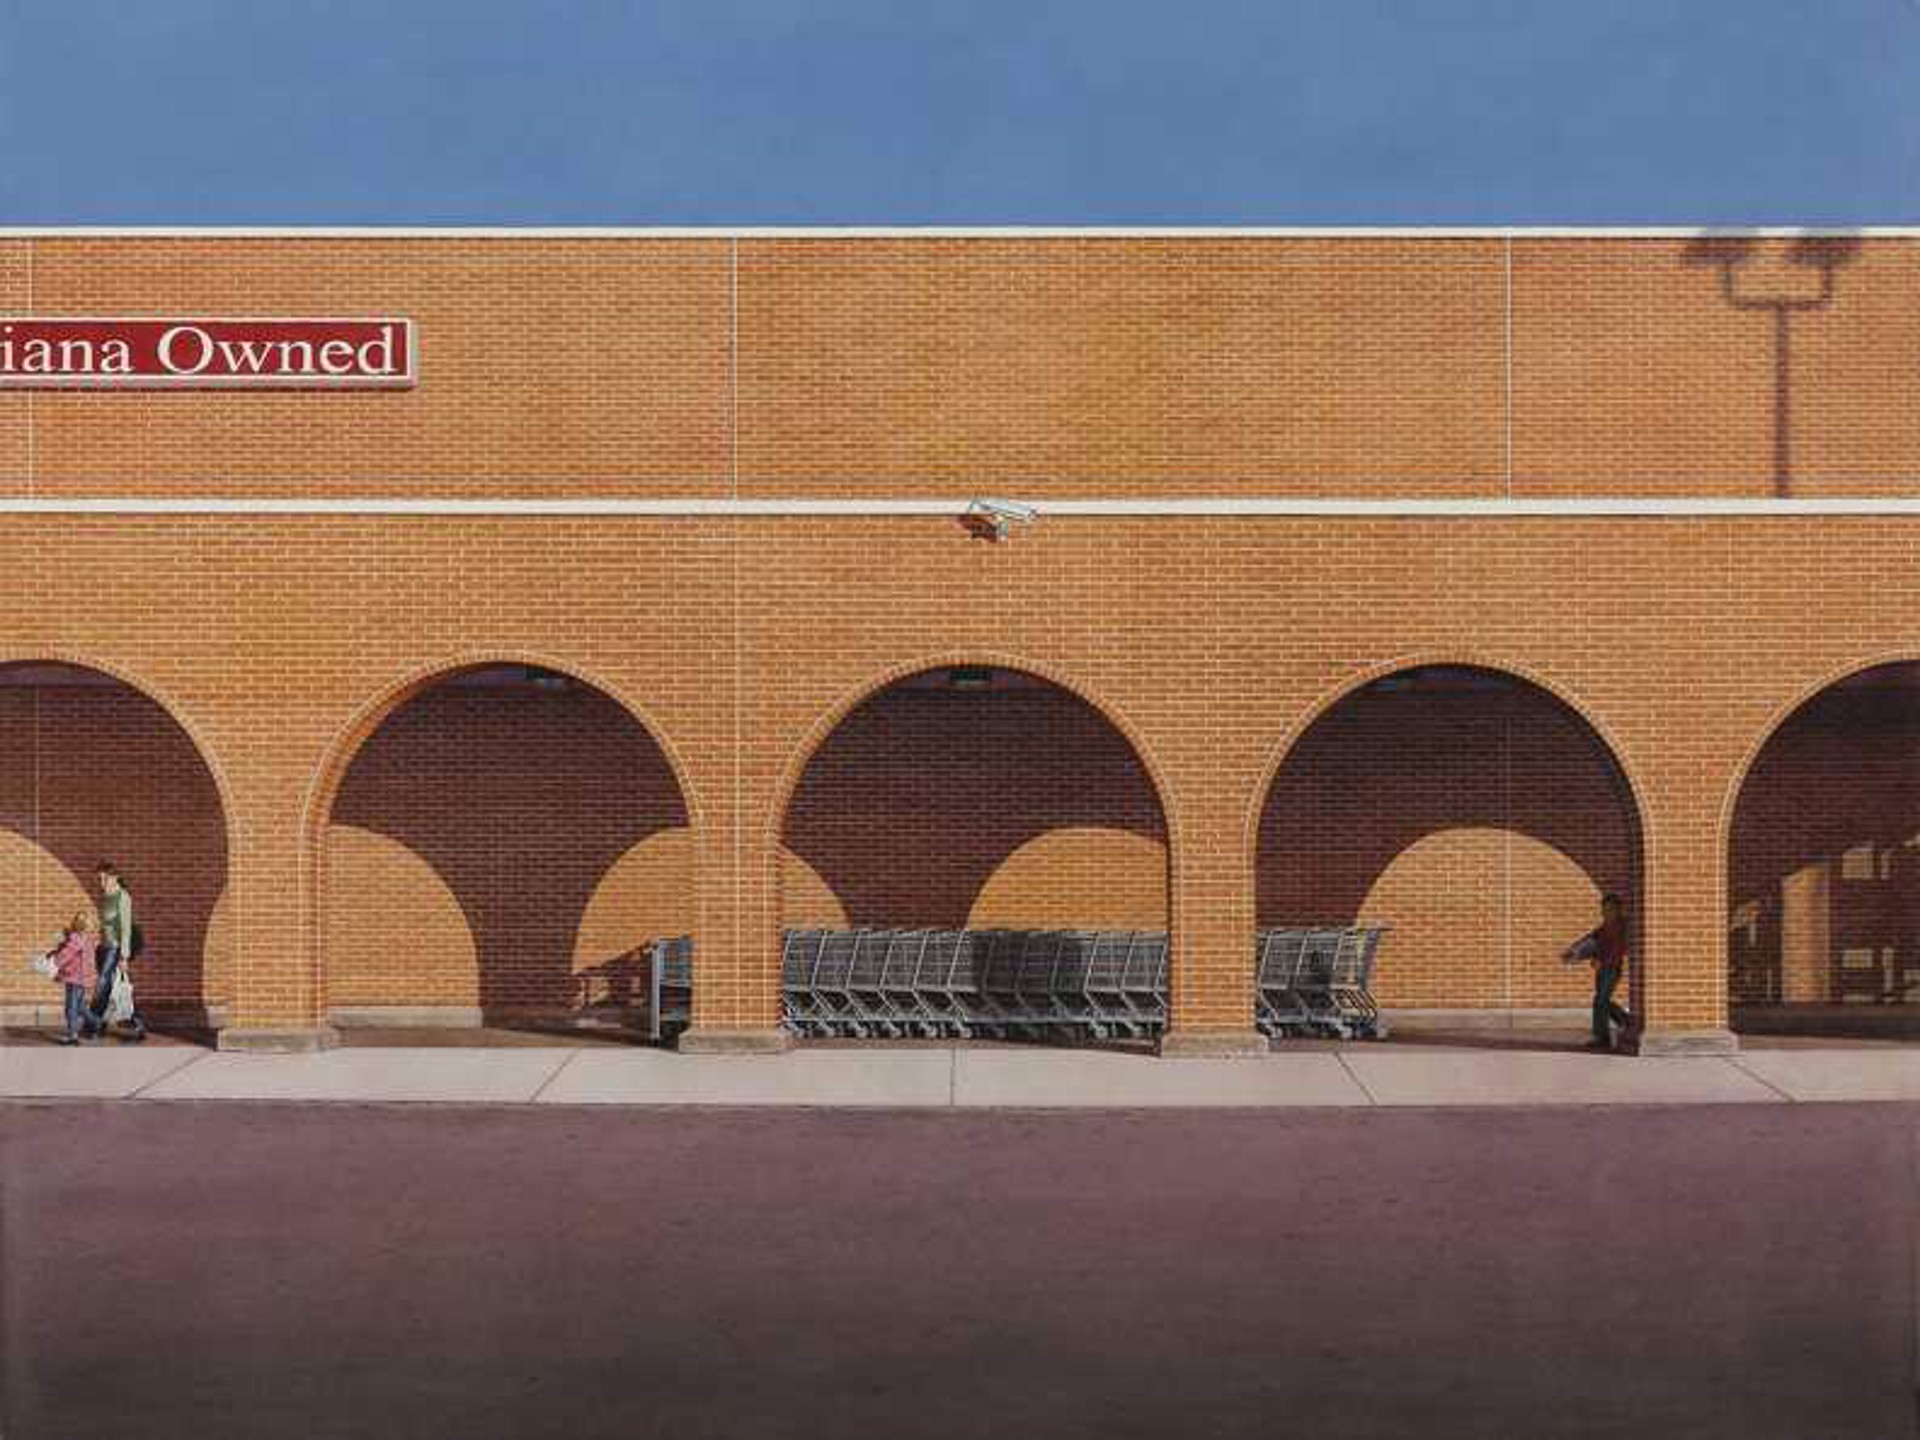 Arches with Shopping Carts by Stephan Hoffpauir